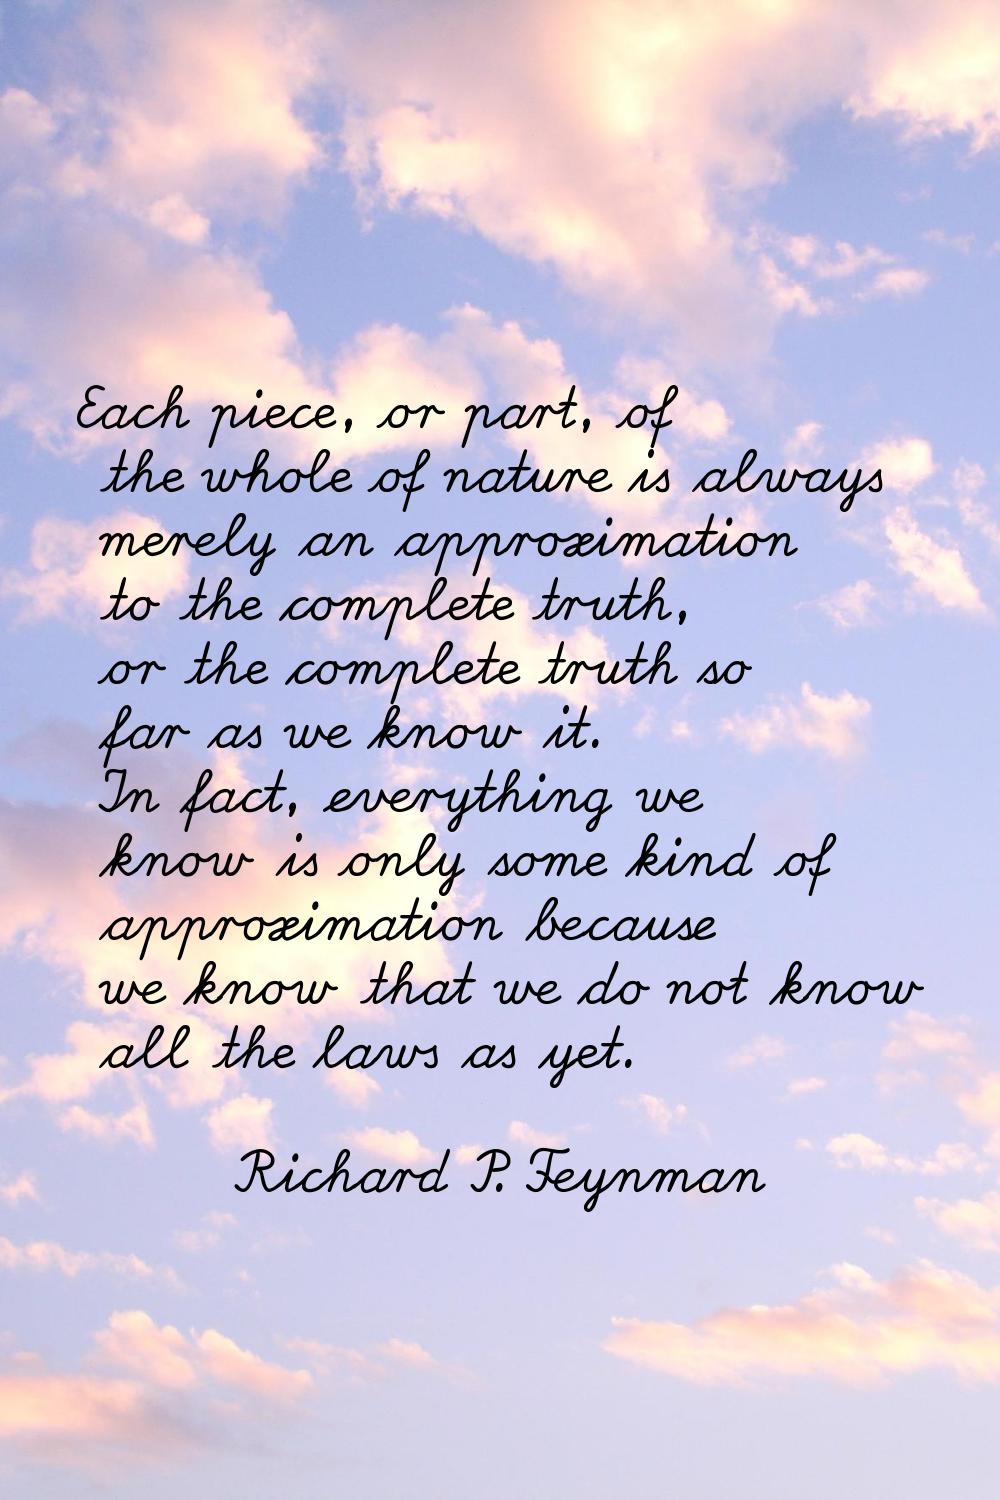 Each piece, or part, of the whole of nature is always merely an approximation to the complete truth